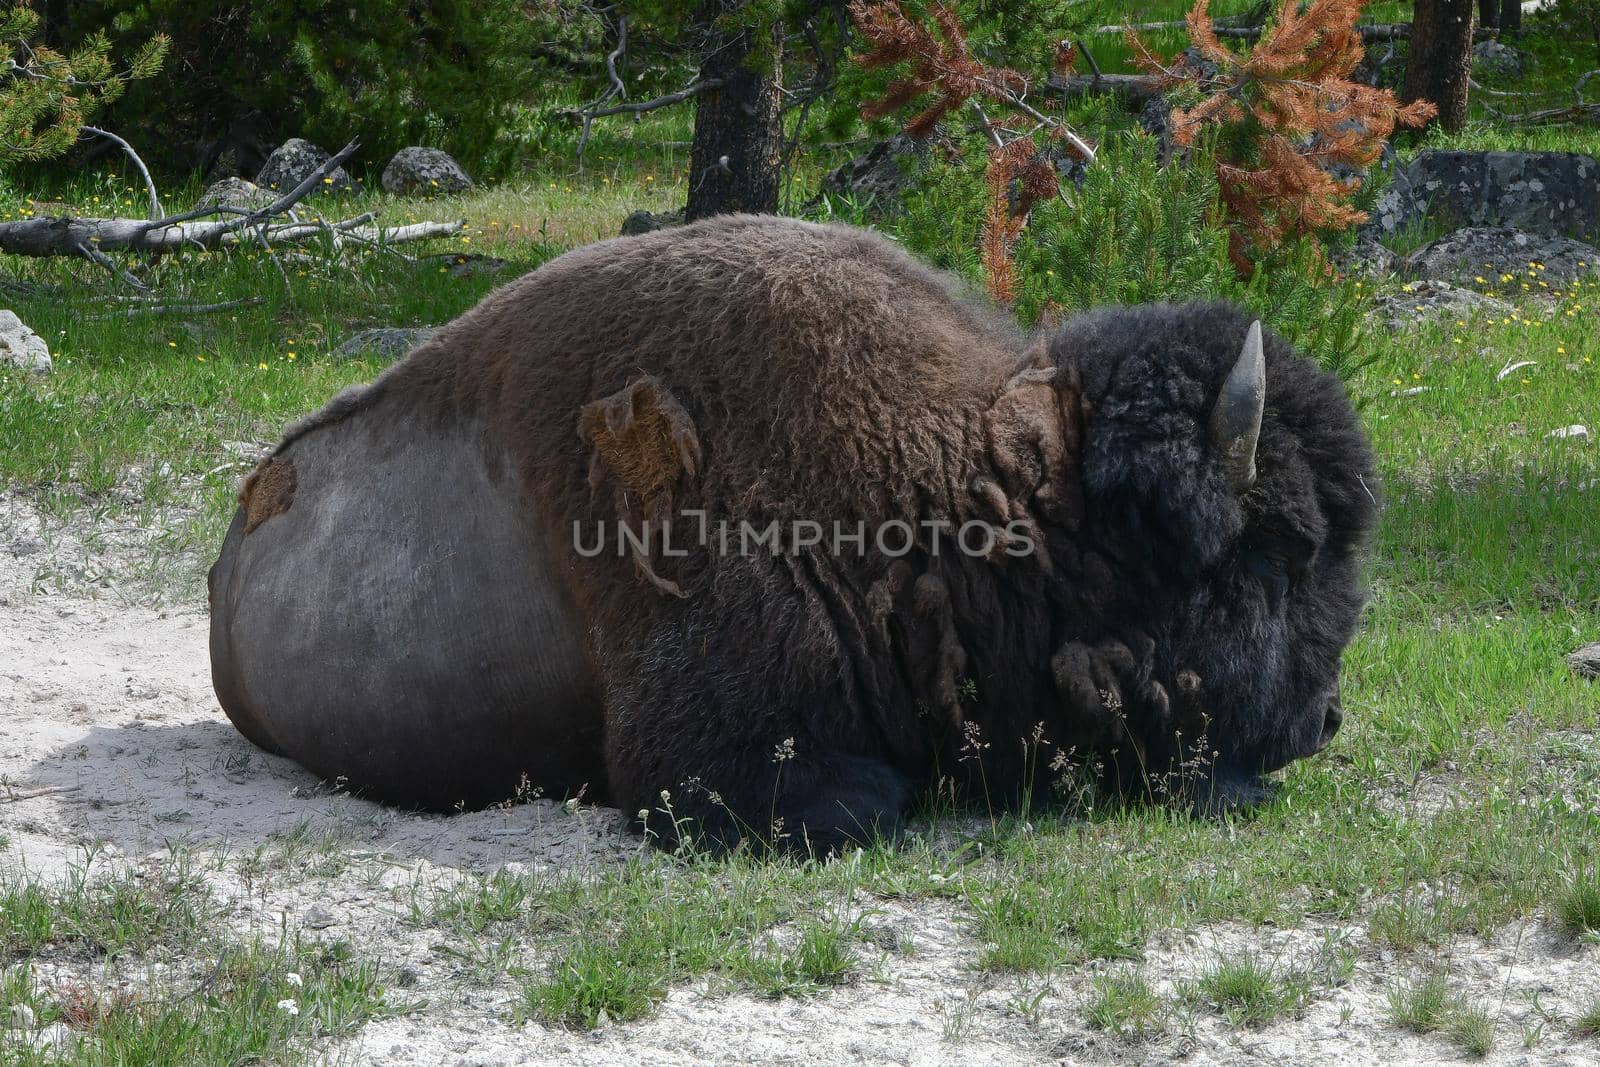 Bison naps in Yellowstone National Park